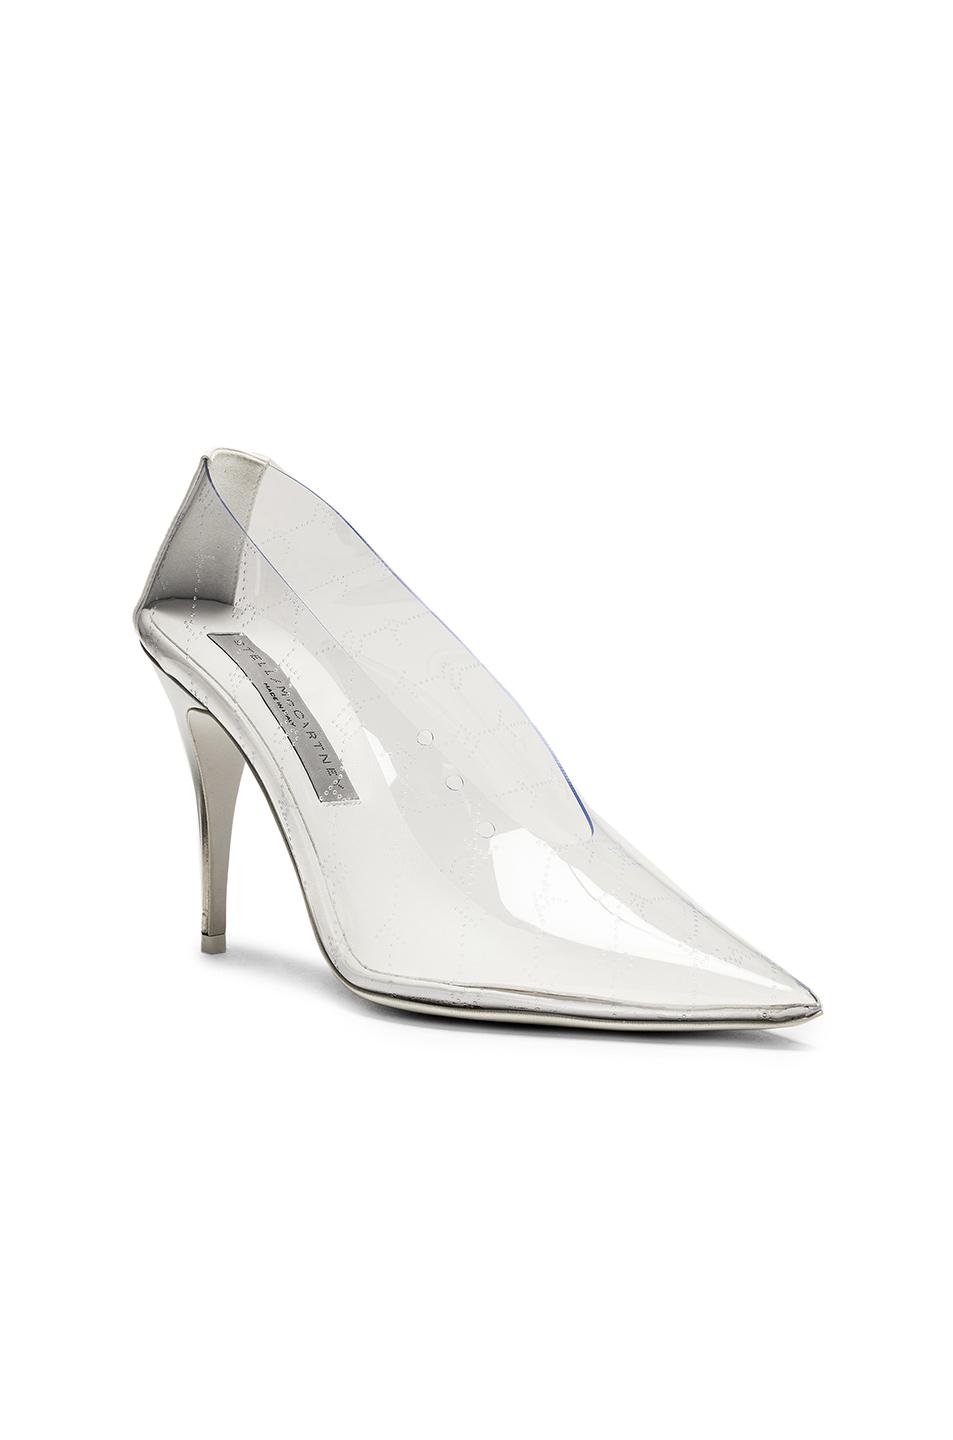 Stella McCartney Clear Pumps in Transparent & White (White) - Lyst